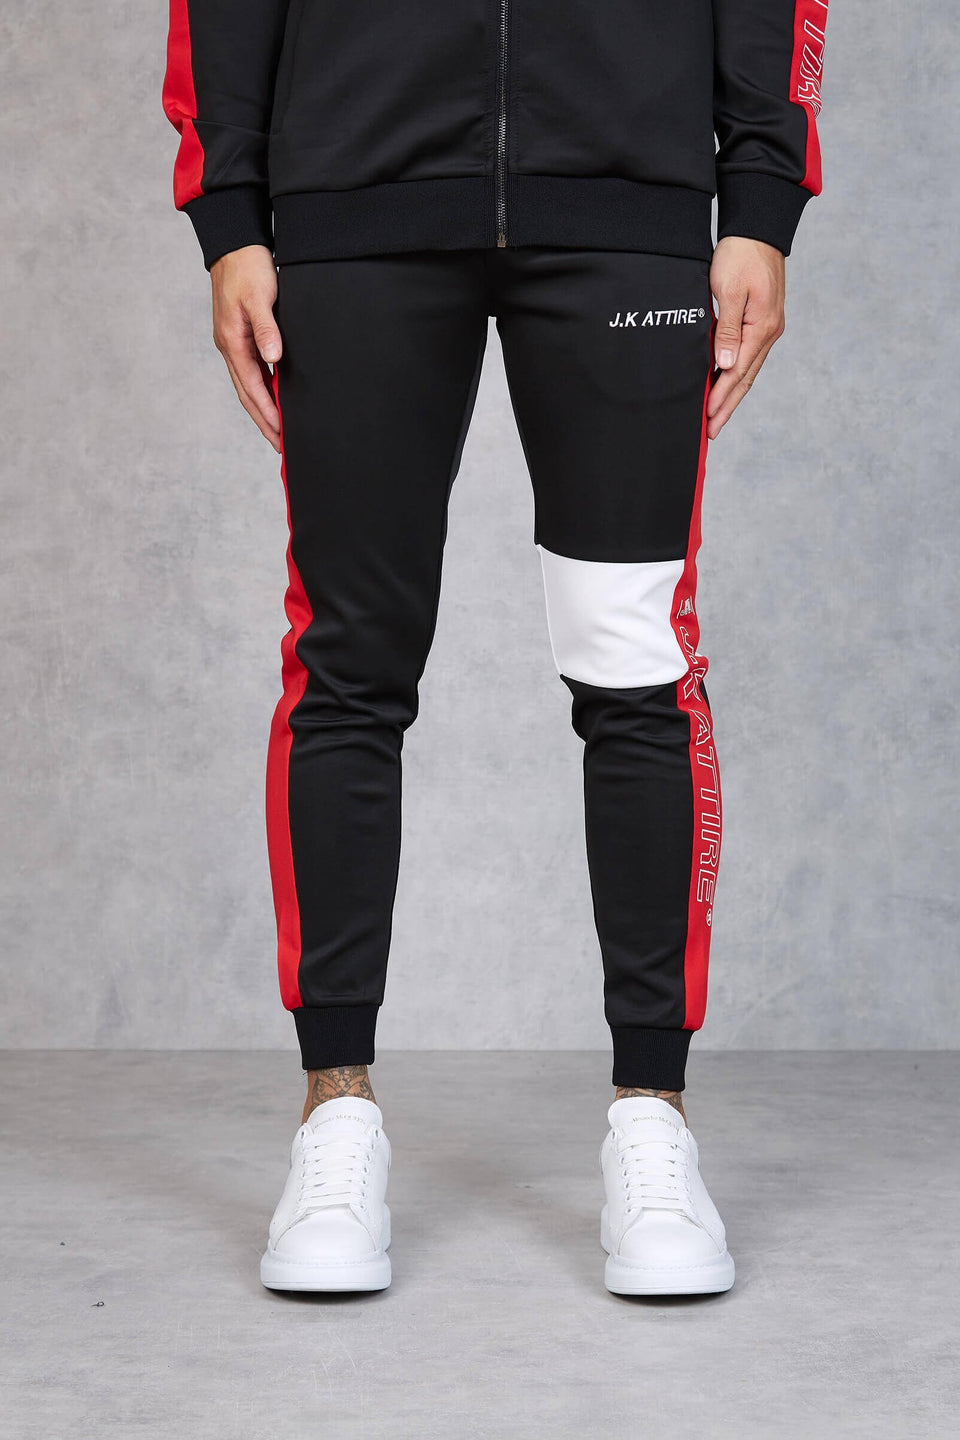 Nuova Contrast Joggers - Black/Red